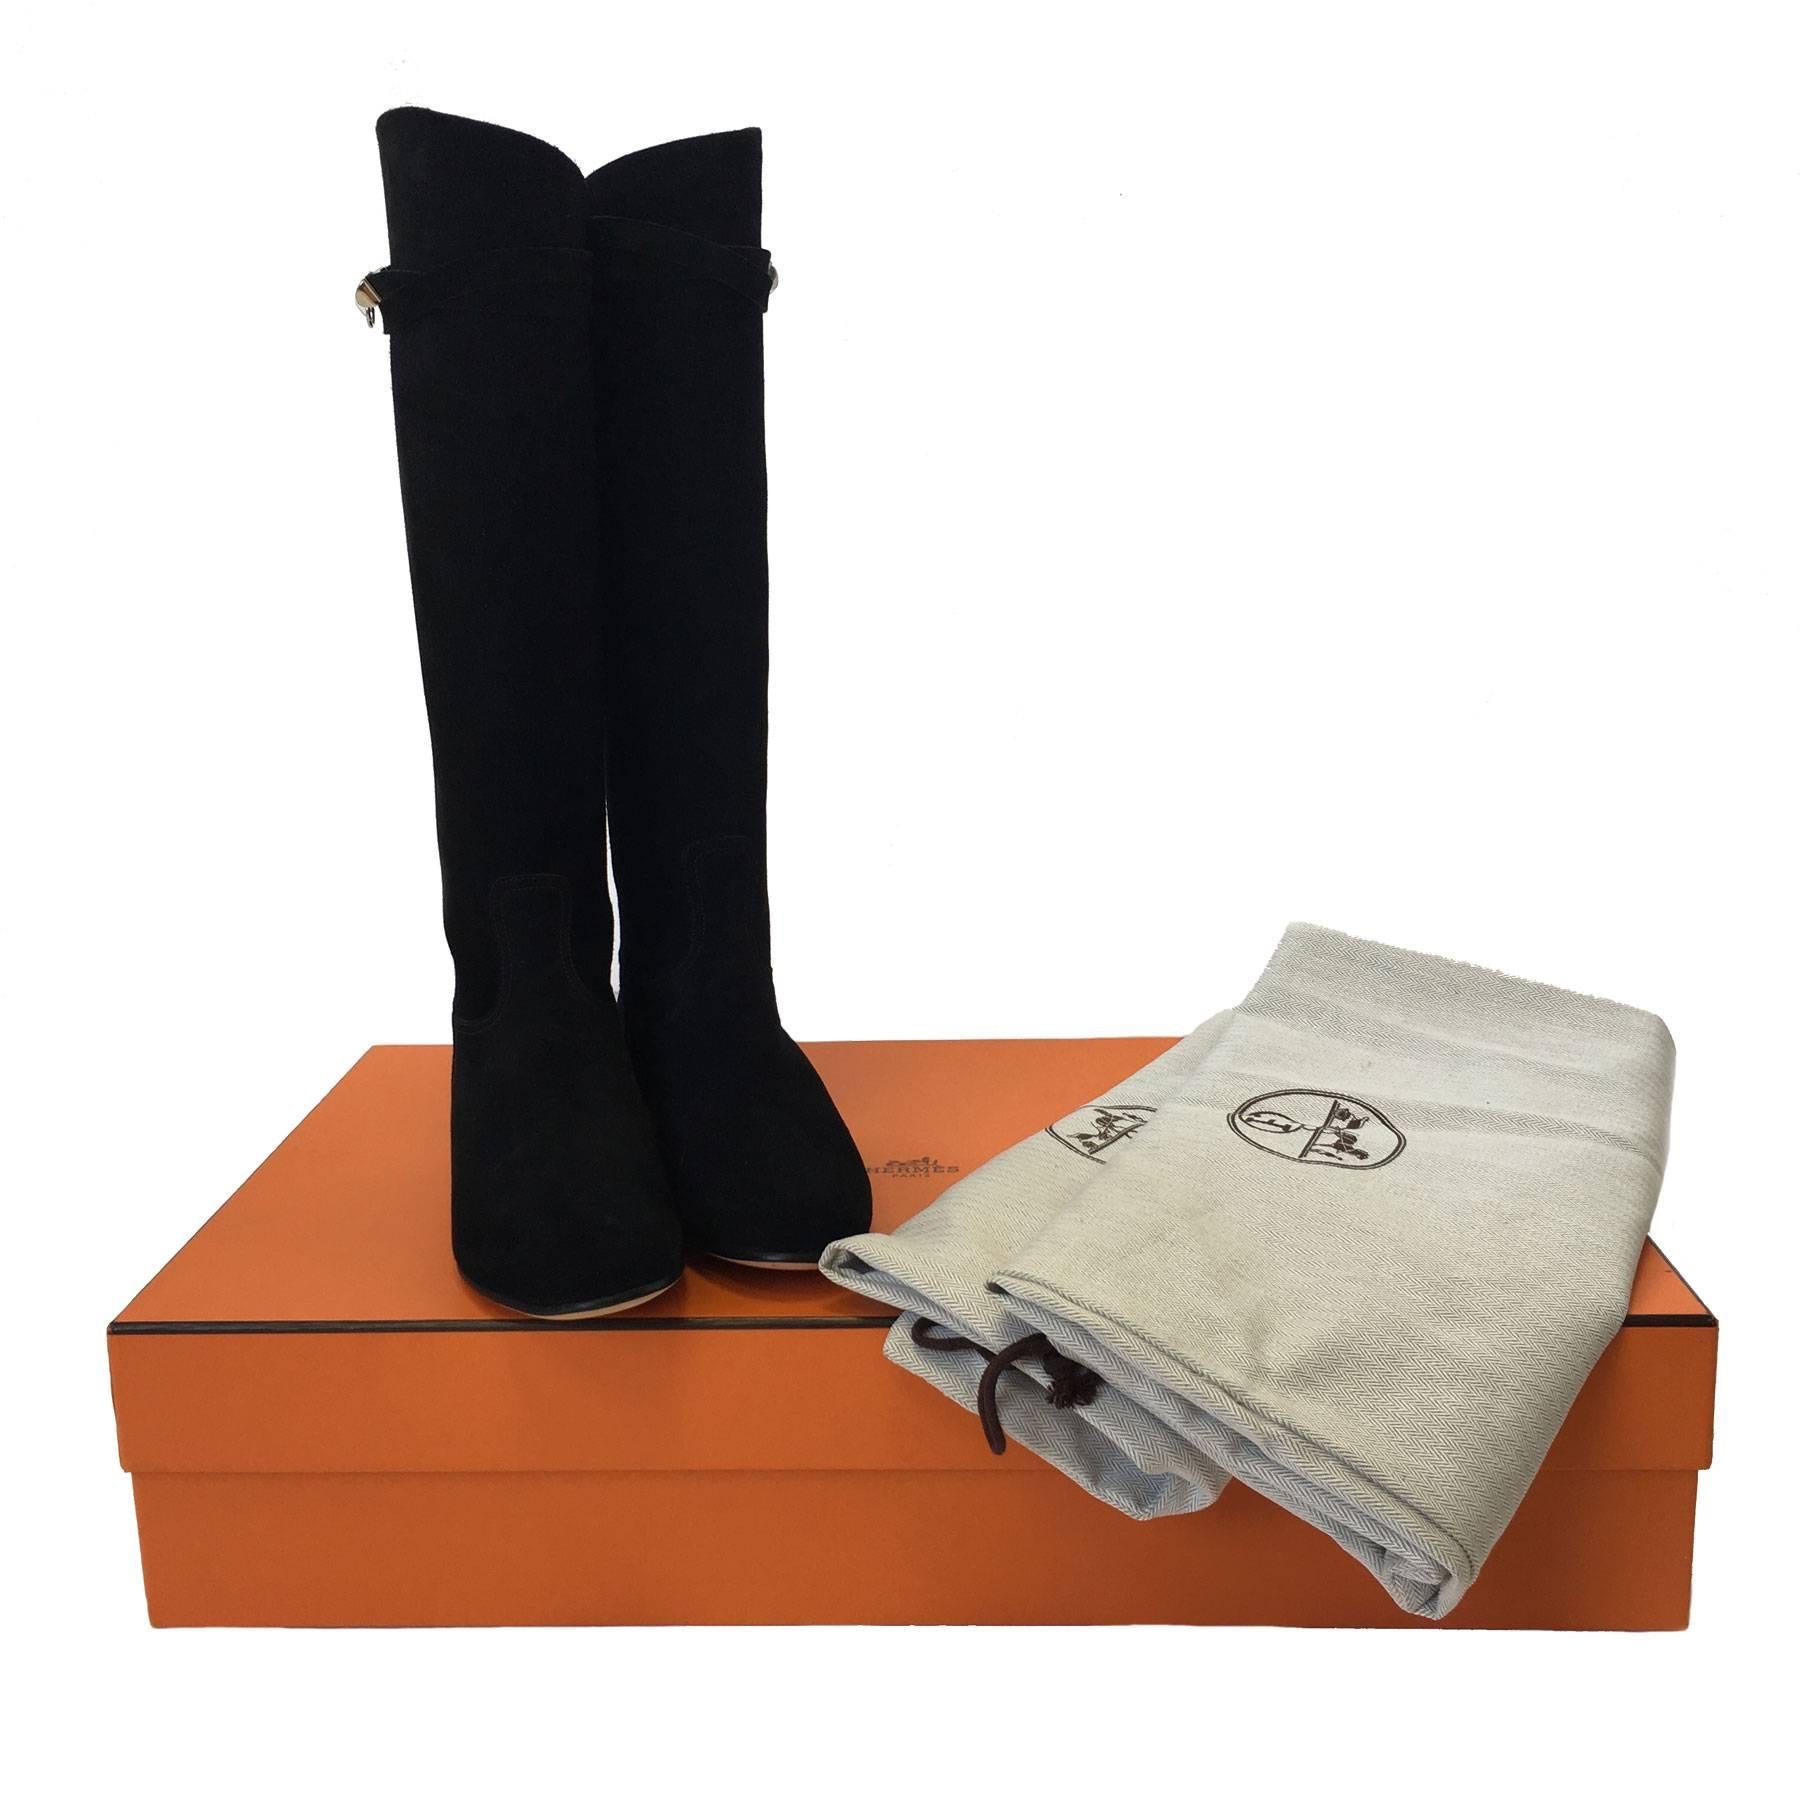 HERMES Riding Boots in Black Suede Size 36.5EU 6